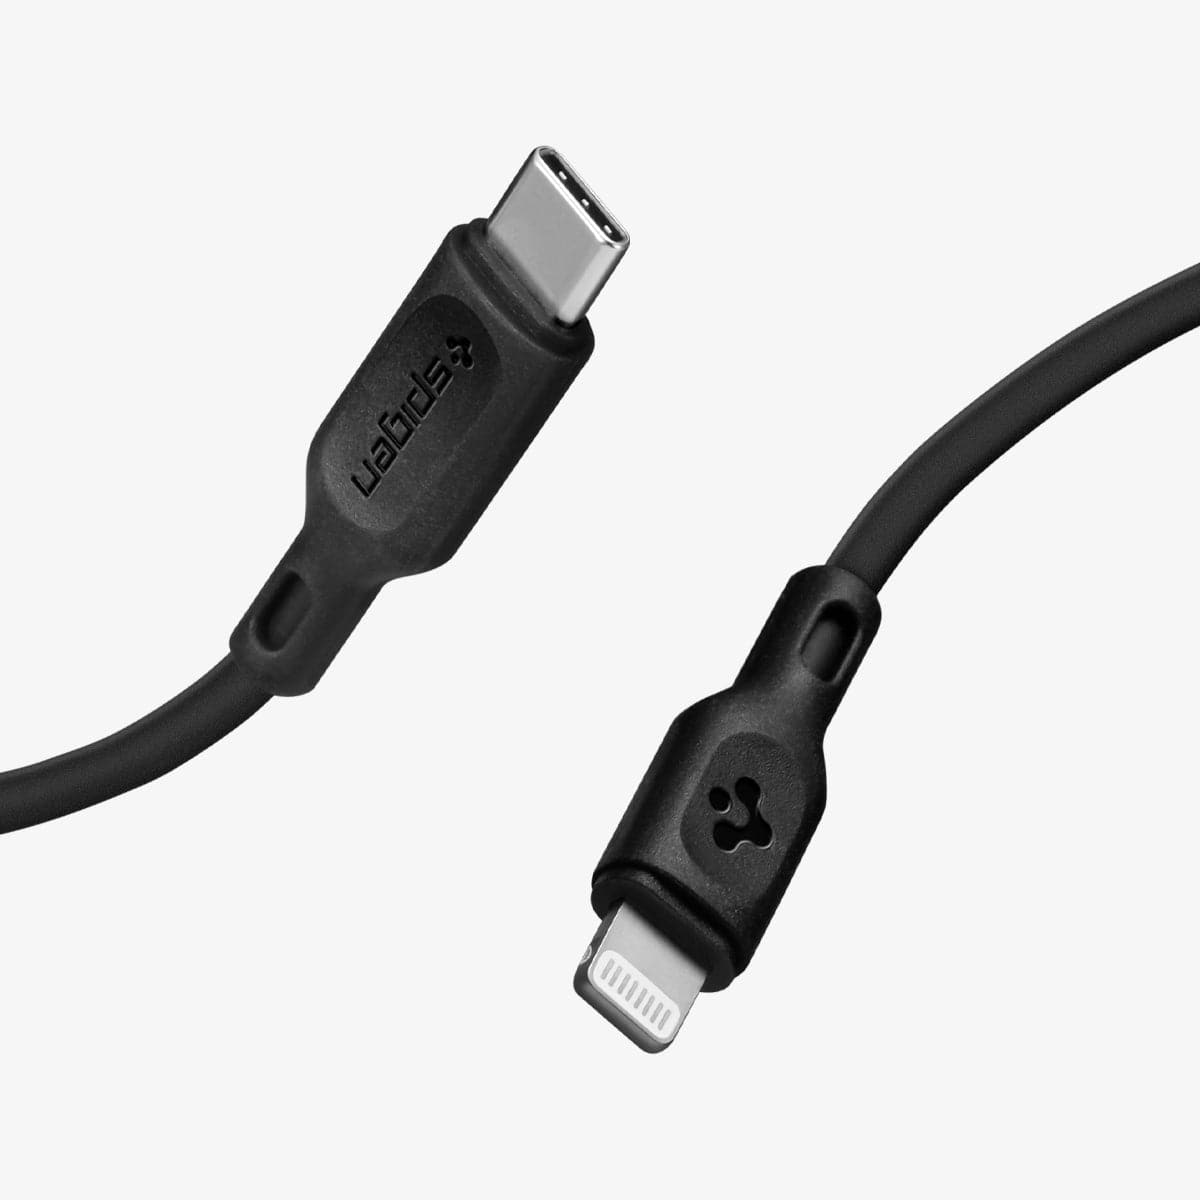 000CA27022 - DuraSync USB-C to Lightning Cable 2 Pack in black showing the lightning cable end and the USB-C end